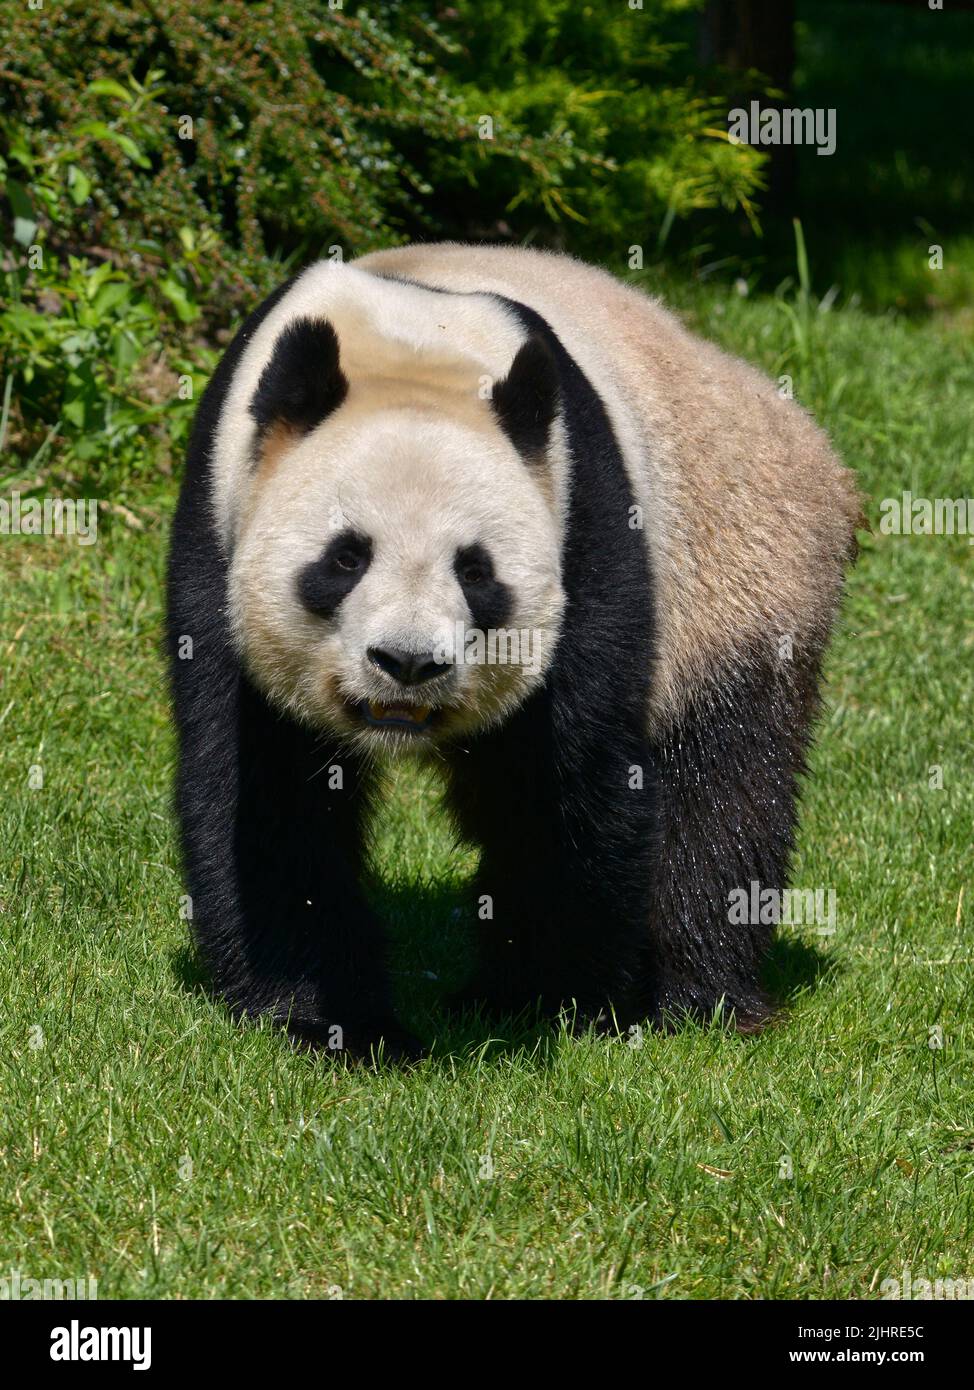 Giant panda (Ailuropoda melanoleuca) standing on grass and seen from front Stock Photo